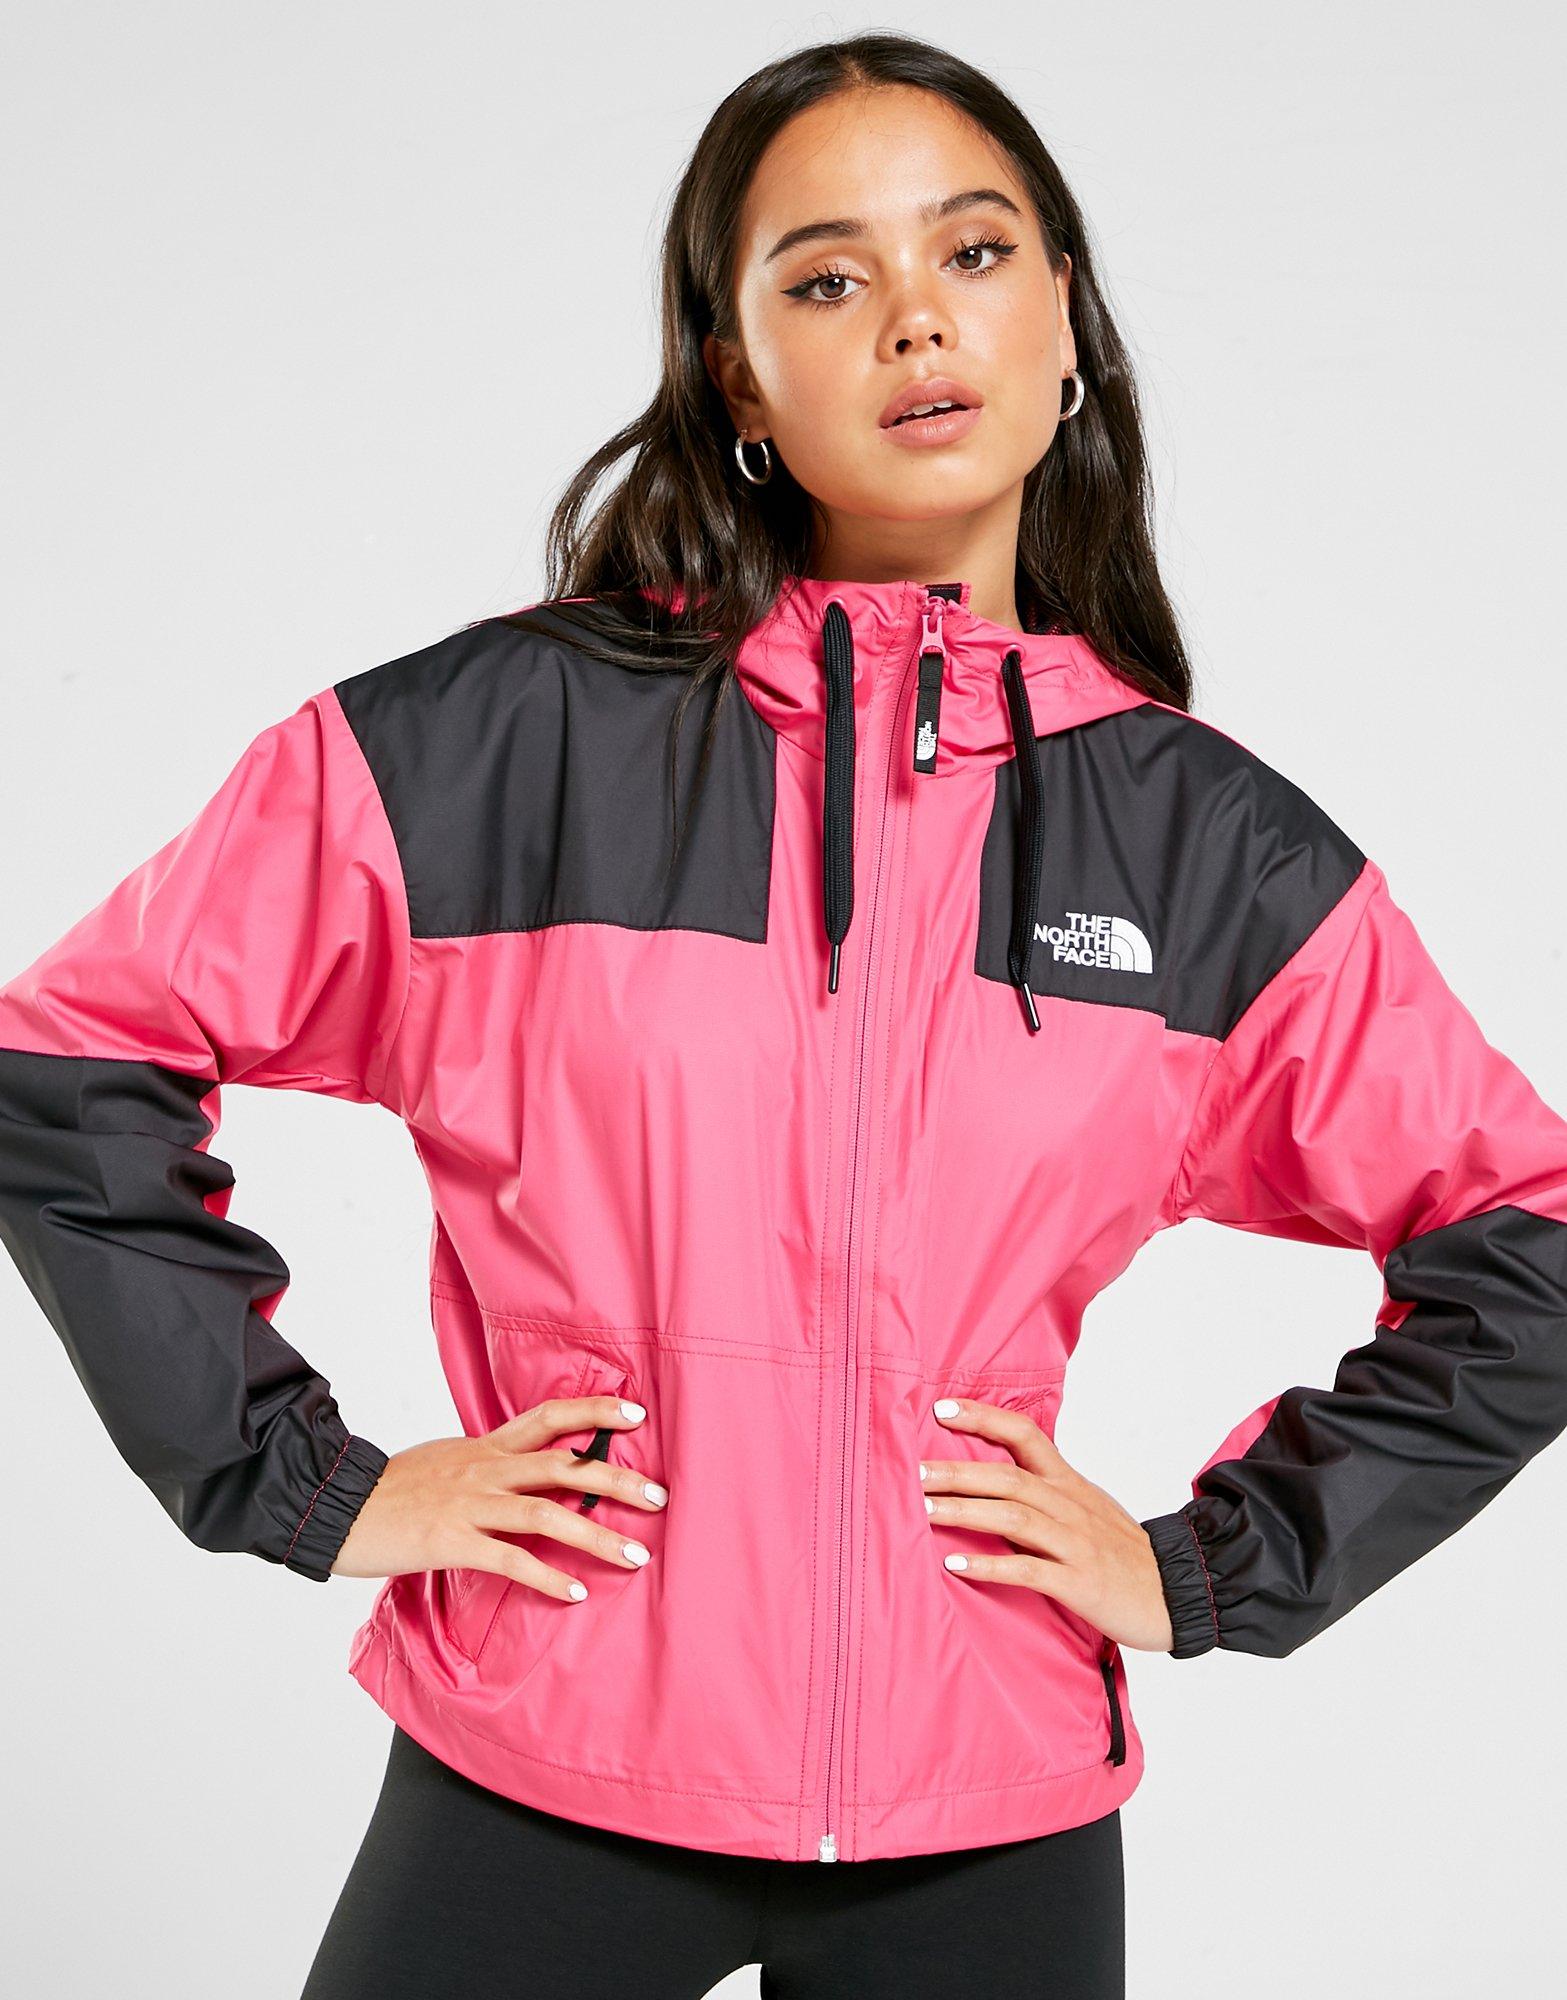 North Face Packable Panel Wind Jacket 